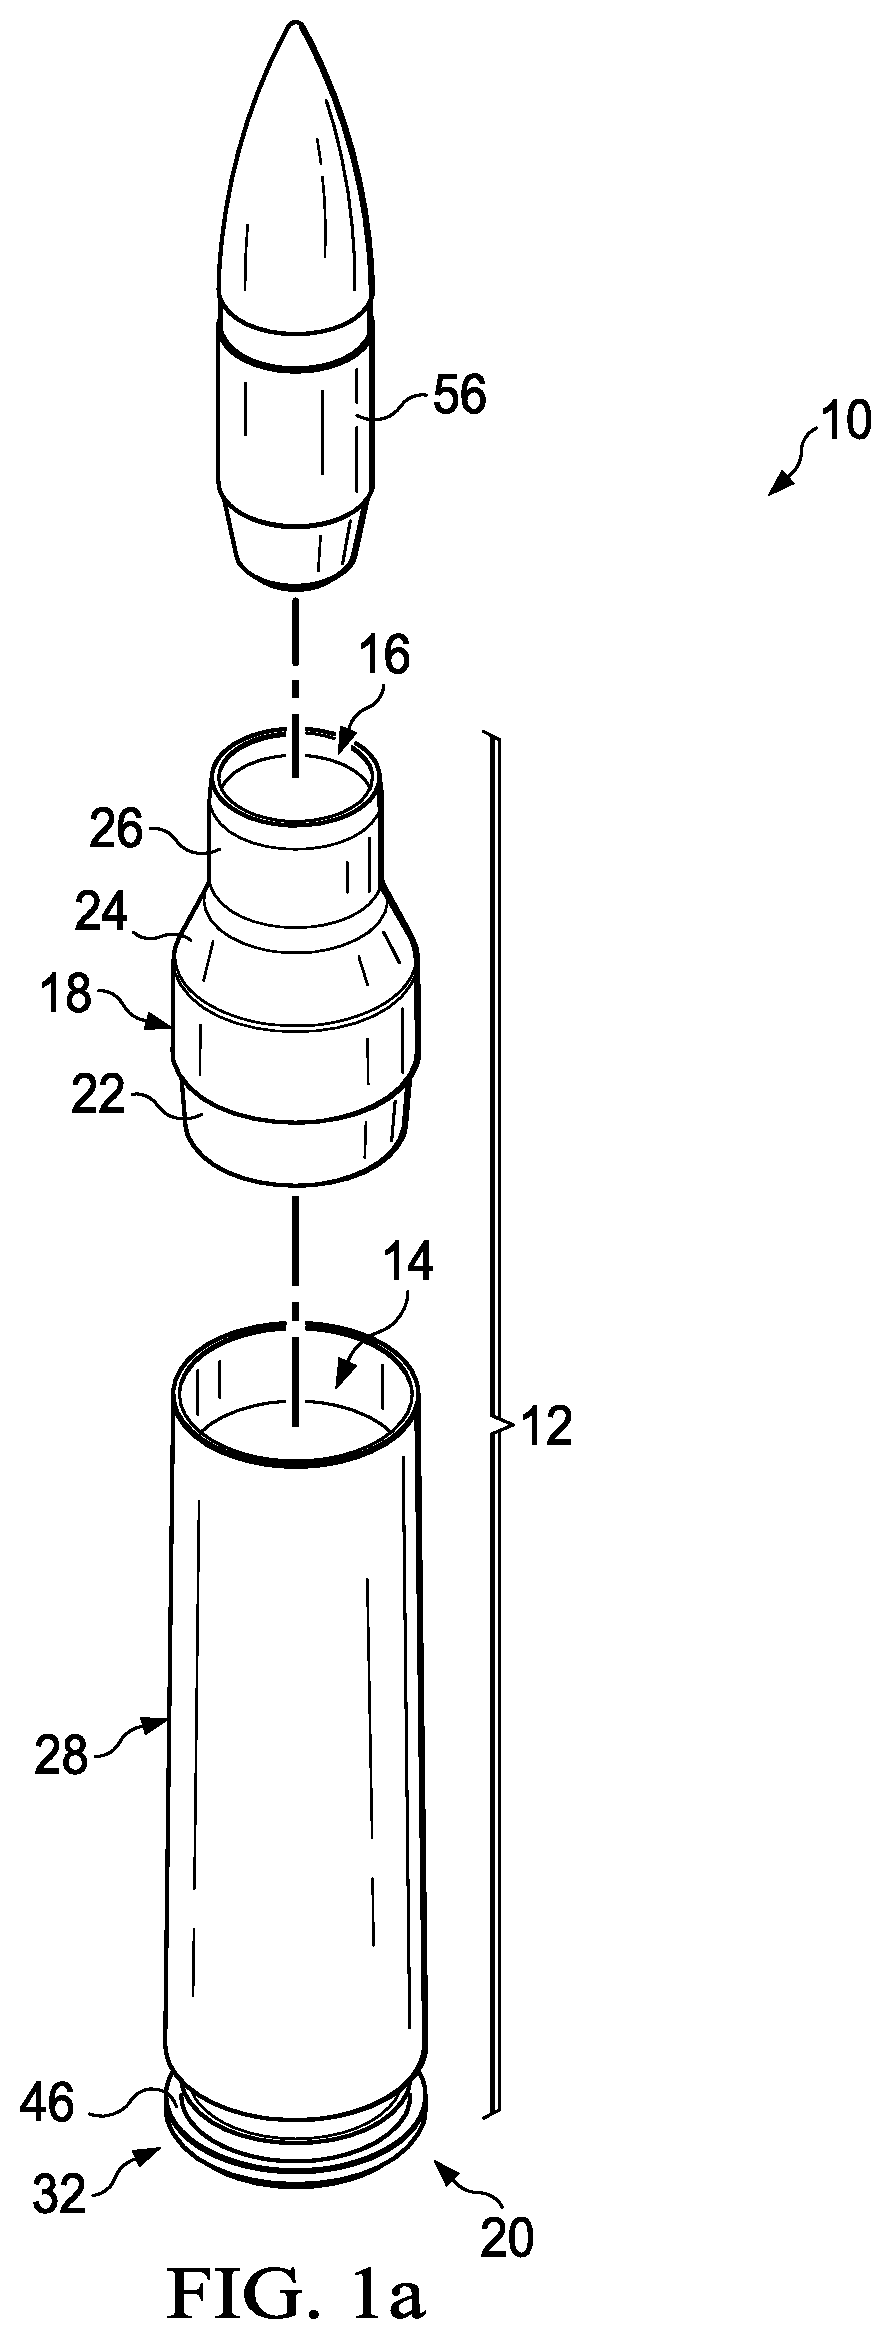 Polymer ammunition having a projectile made by metal injection molding